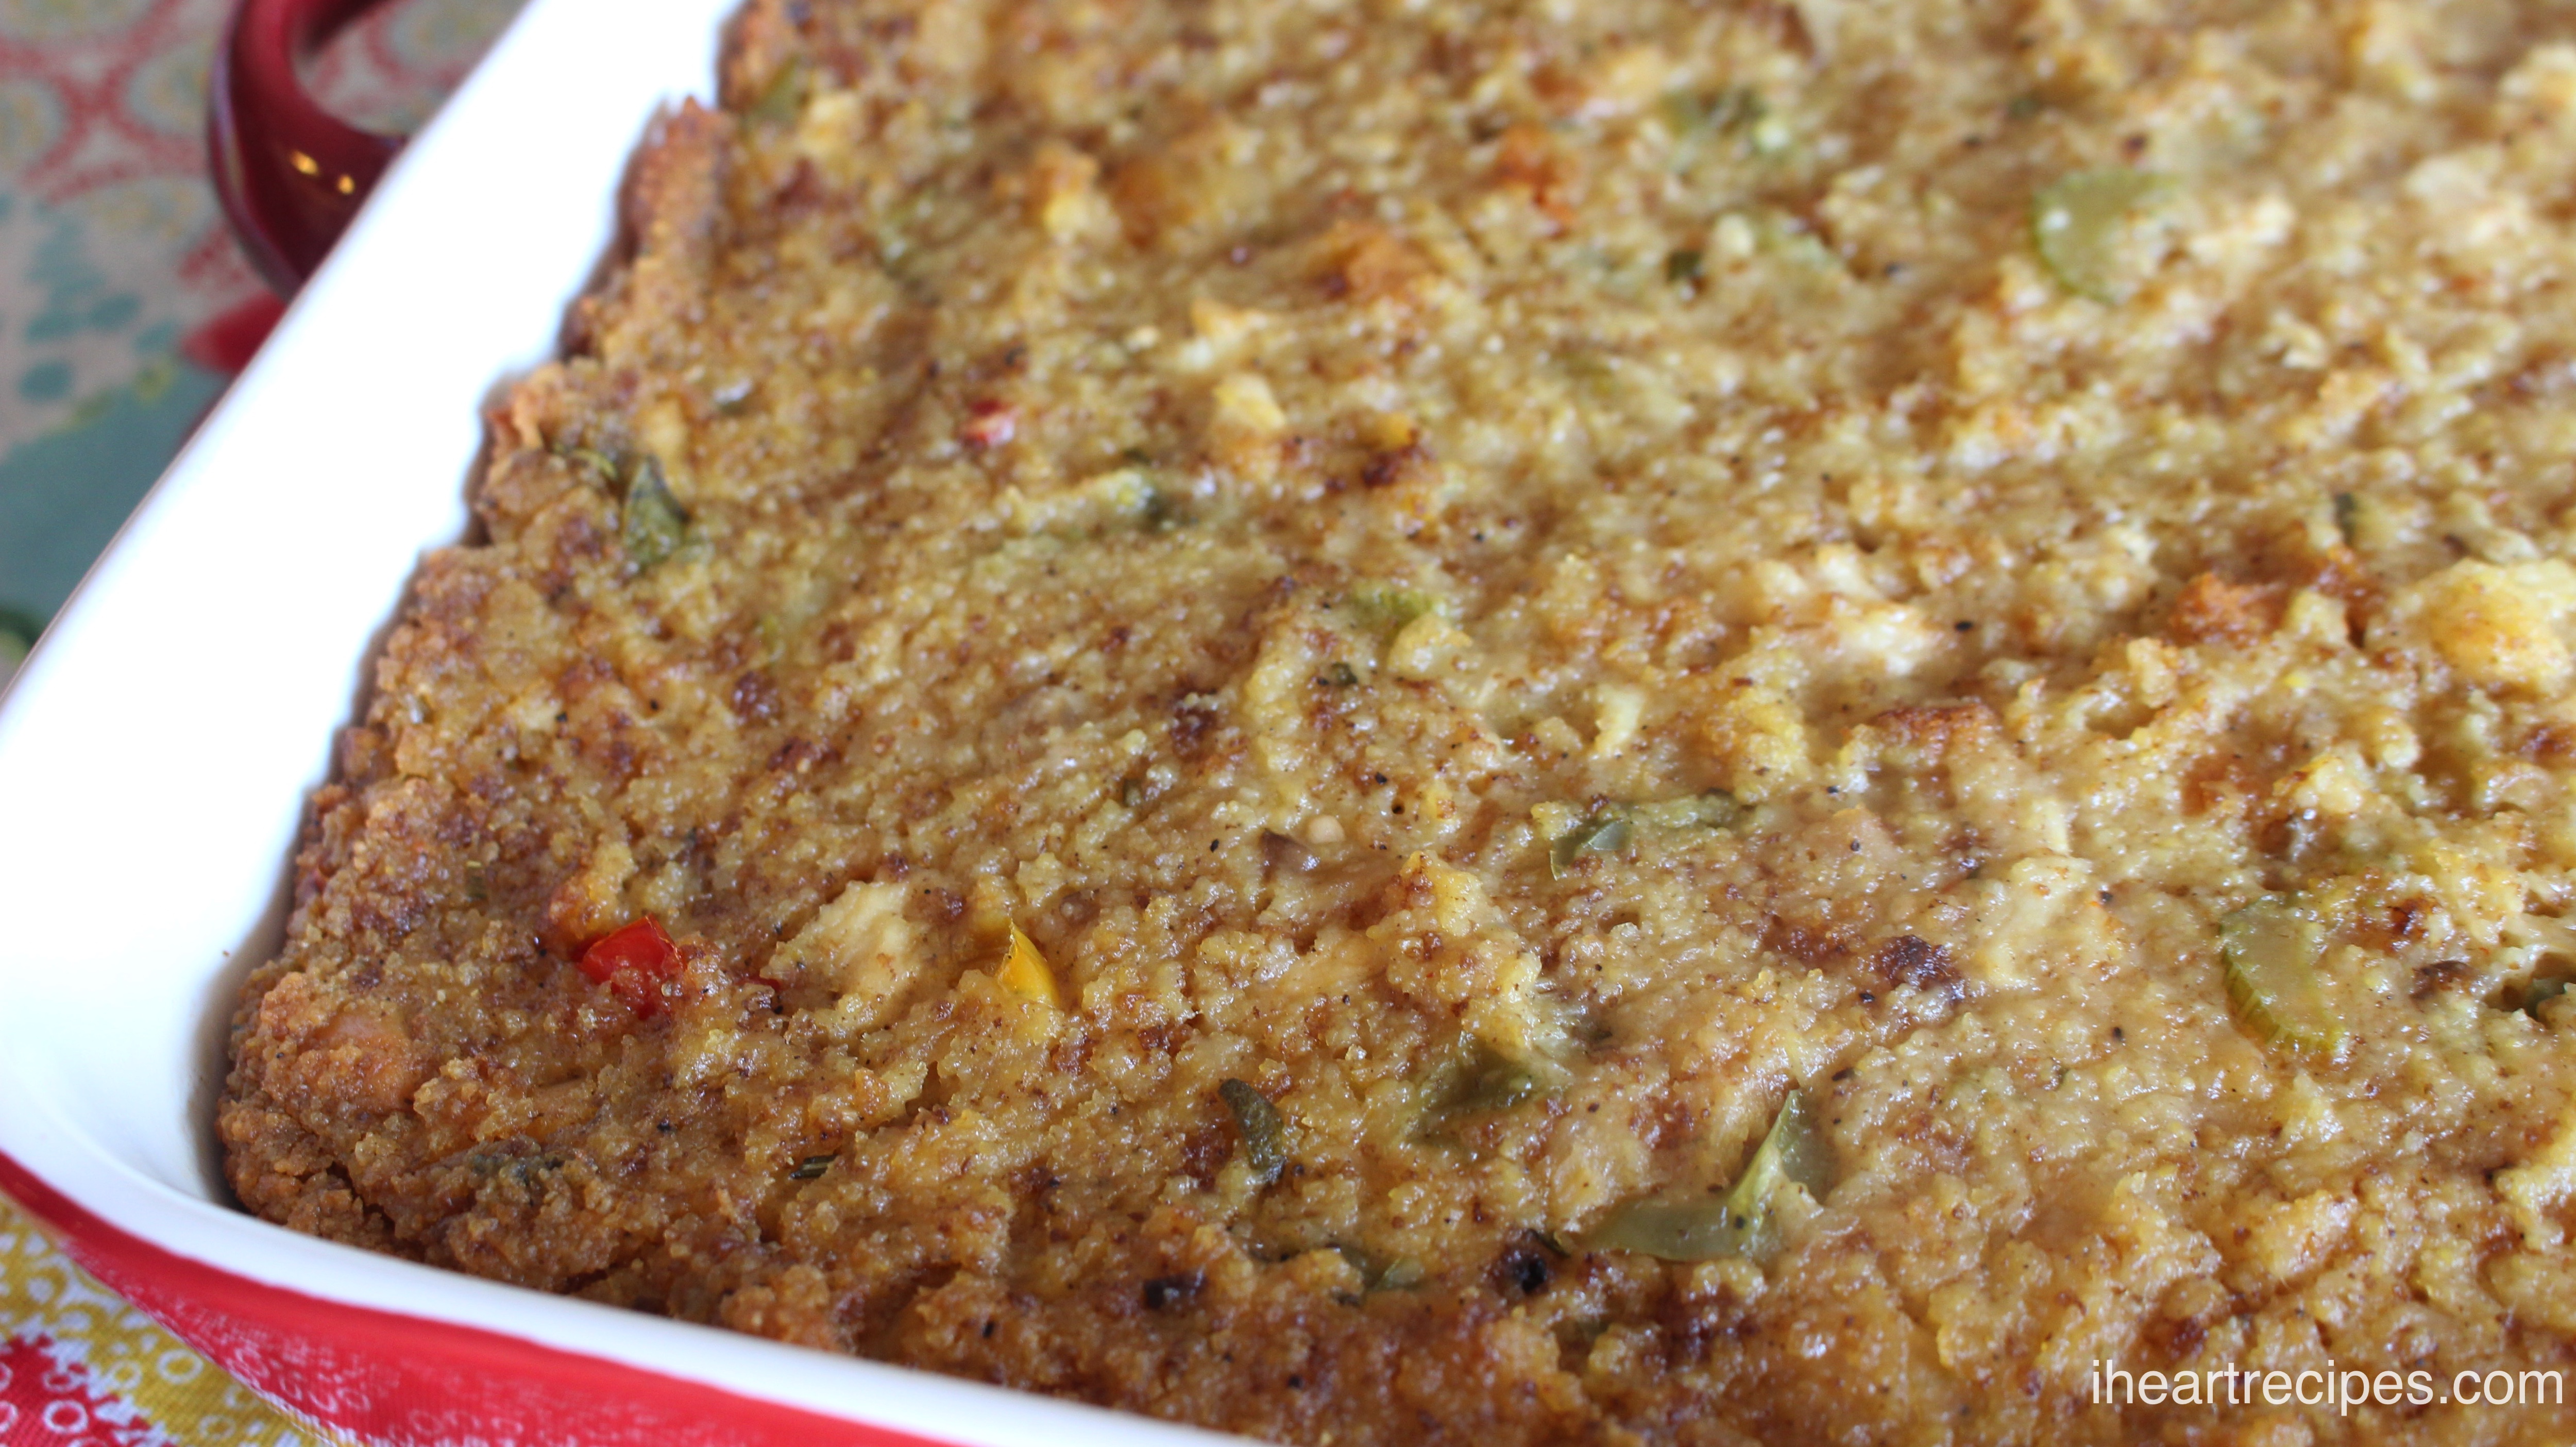 Classic Southern Cornbread Dressing served in a red and white baking dish. This will quickly become a family favorite!